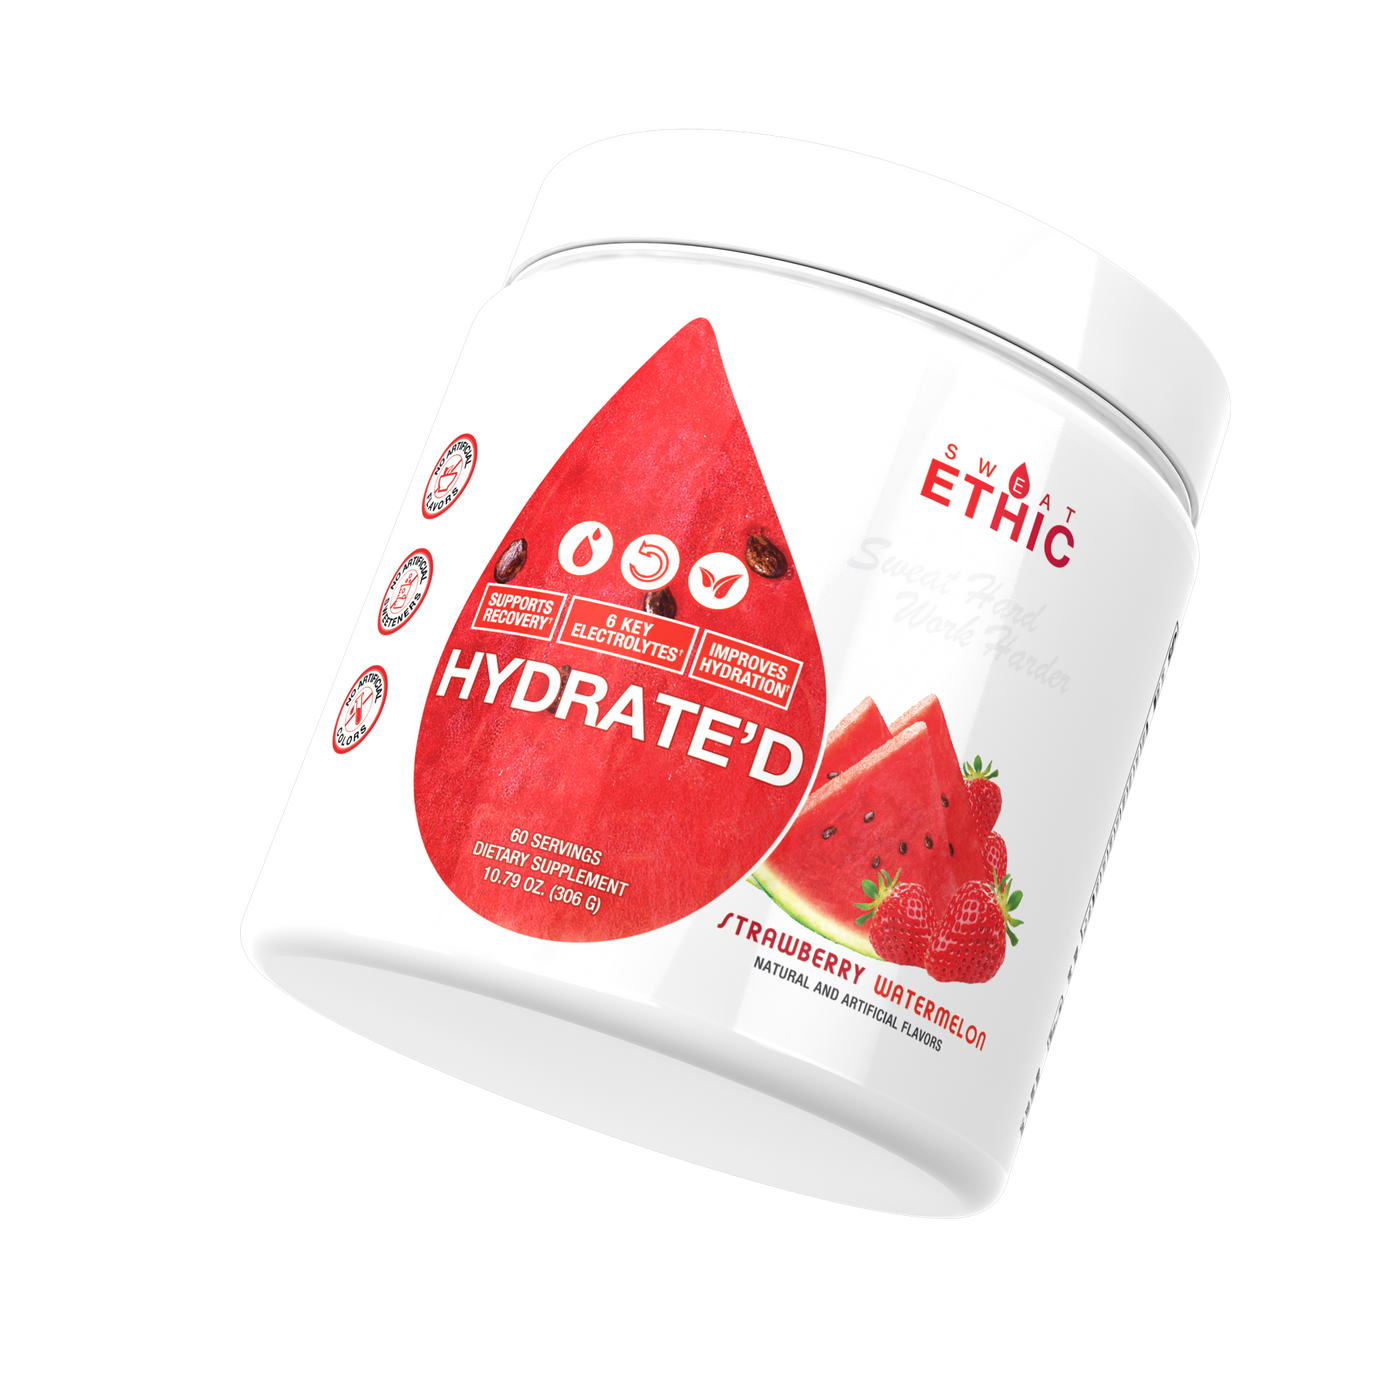 HYDRATE'D ELECTROLYTES - Sweat Ethic